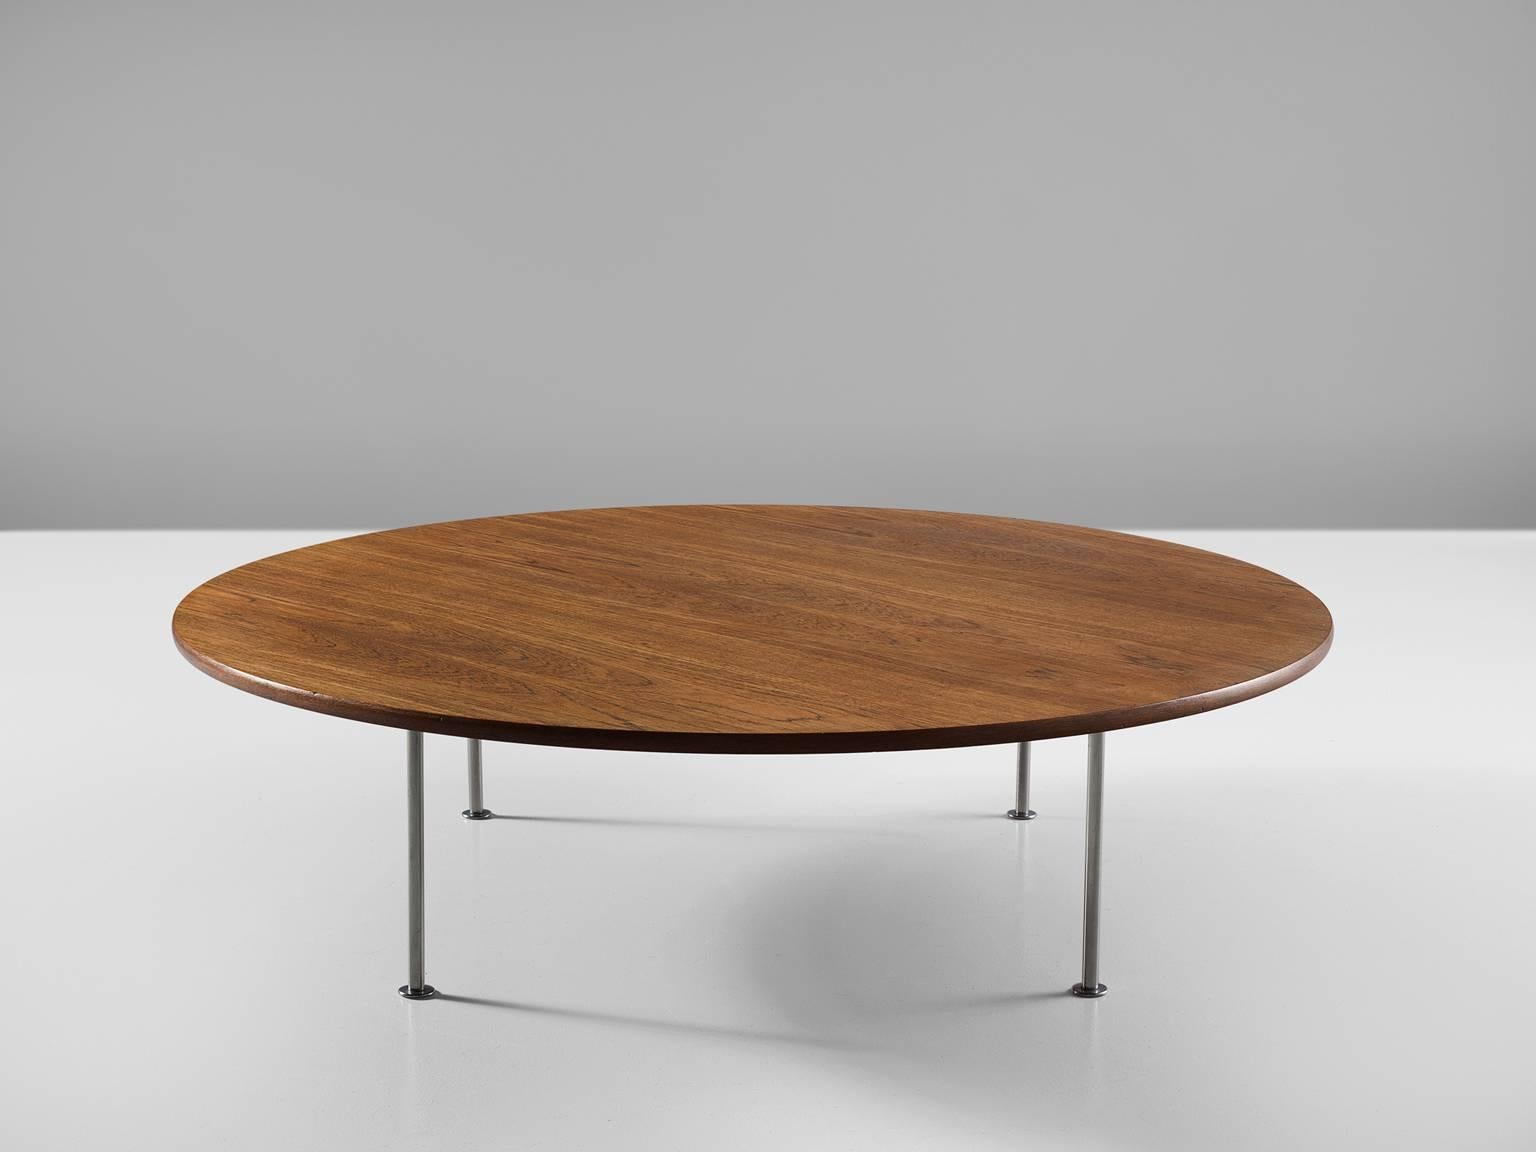 Coffee table, teak and chromed steel by Hans J. Wegner for Andreas Tuck, Denmark, 1950s.

This large coffee table with a teak circular top is a true example of Wegner's simple but majestic designs. The proportions of this modest (but large) coffee